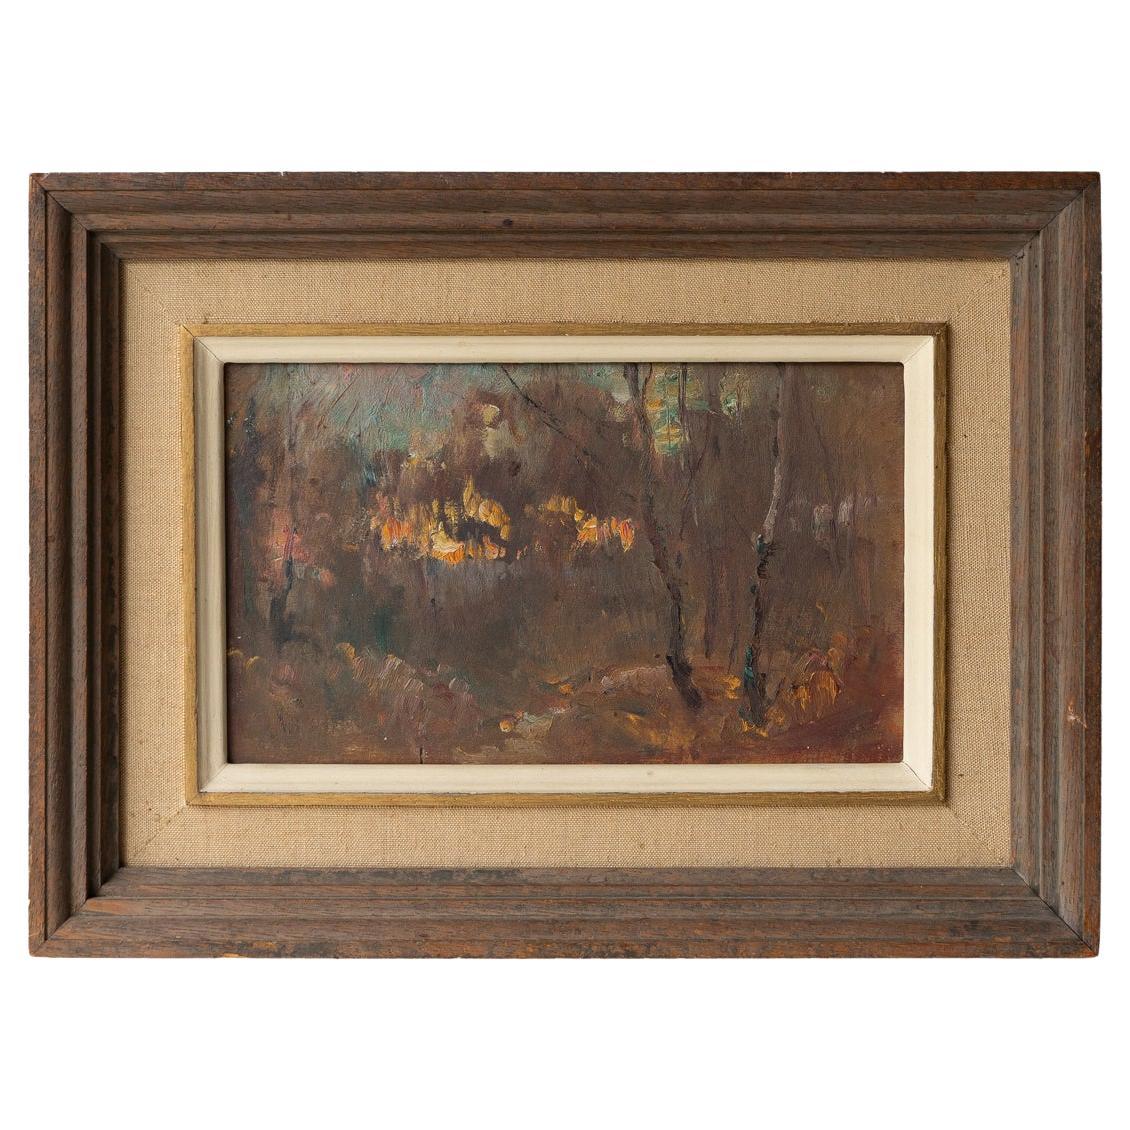 English Impressionist Landscape By James Herbert Snell, Antique Oil Painting